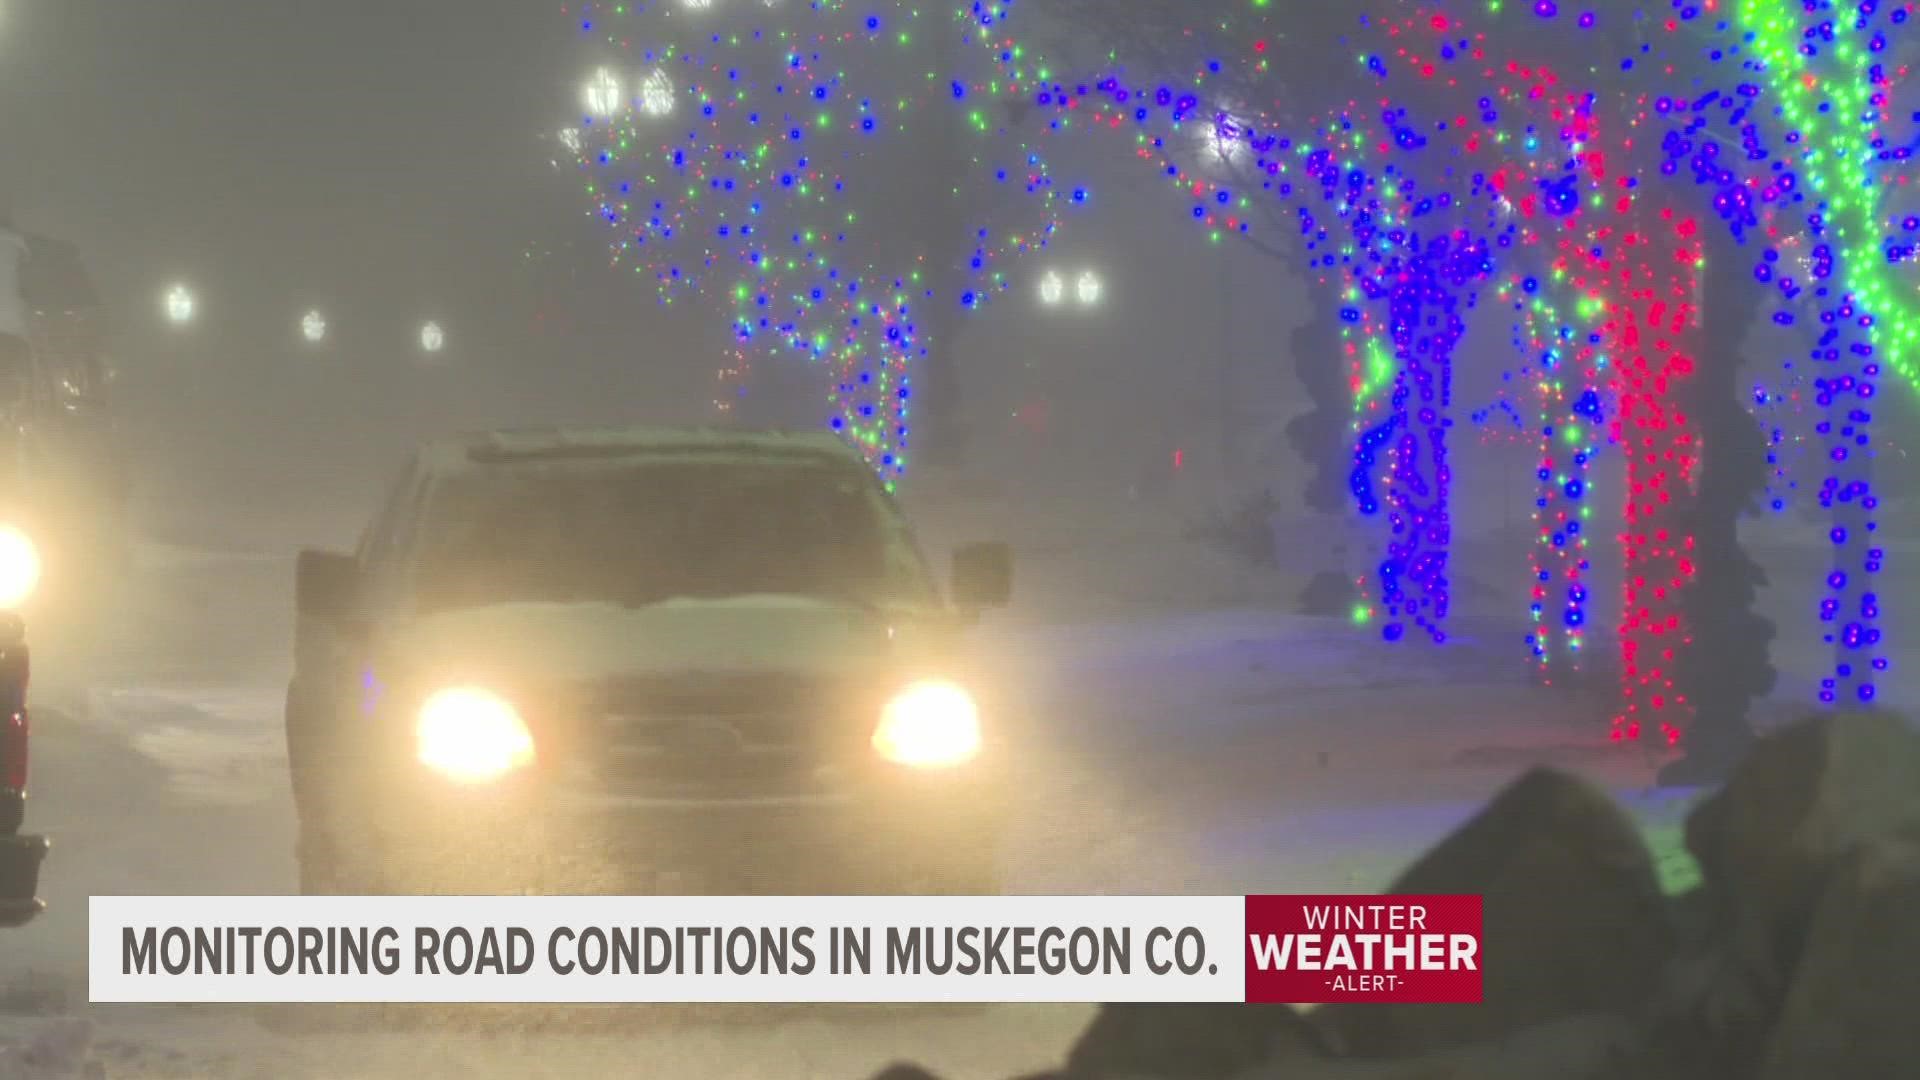 Crews in Muskegon County have been working overnight to keep roads clear. Muskegon is expected to receive more snow than other areas.